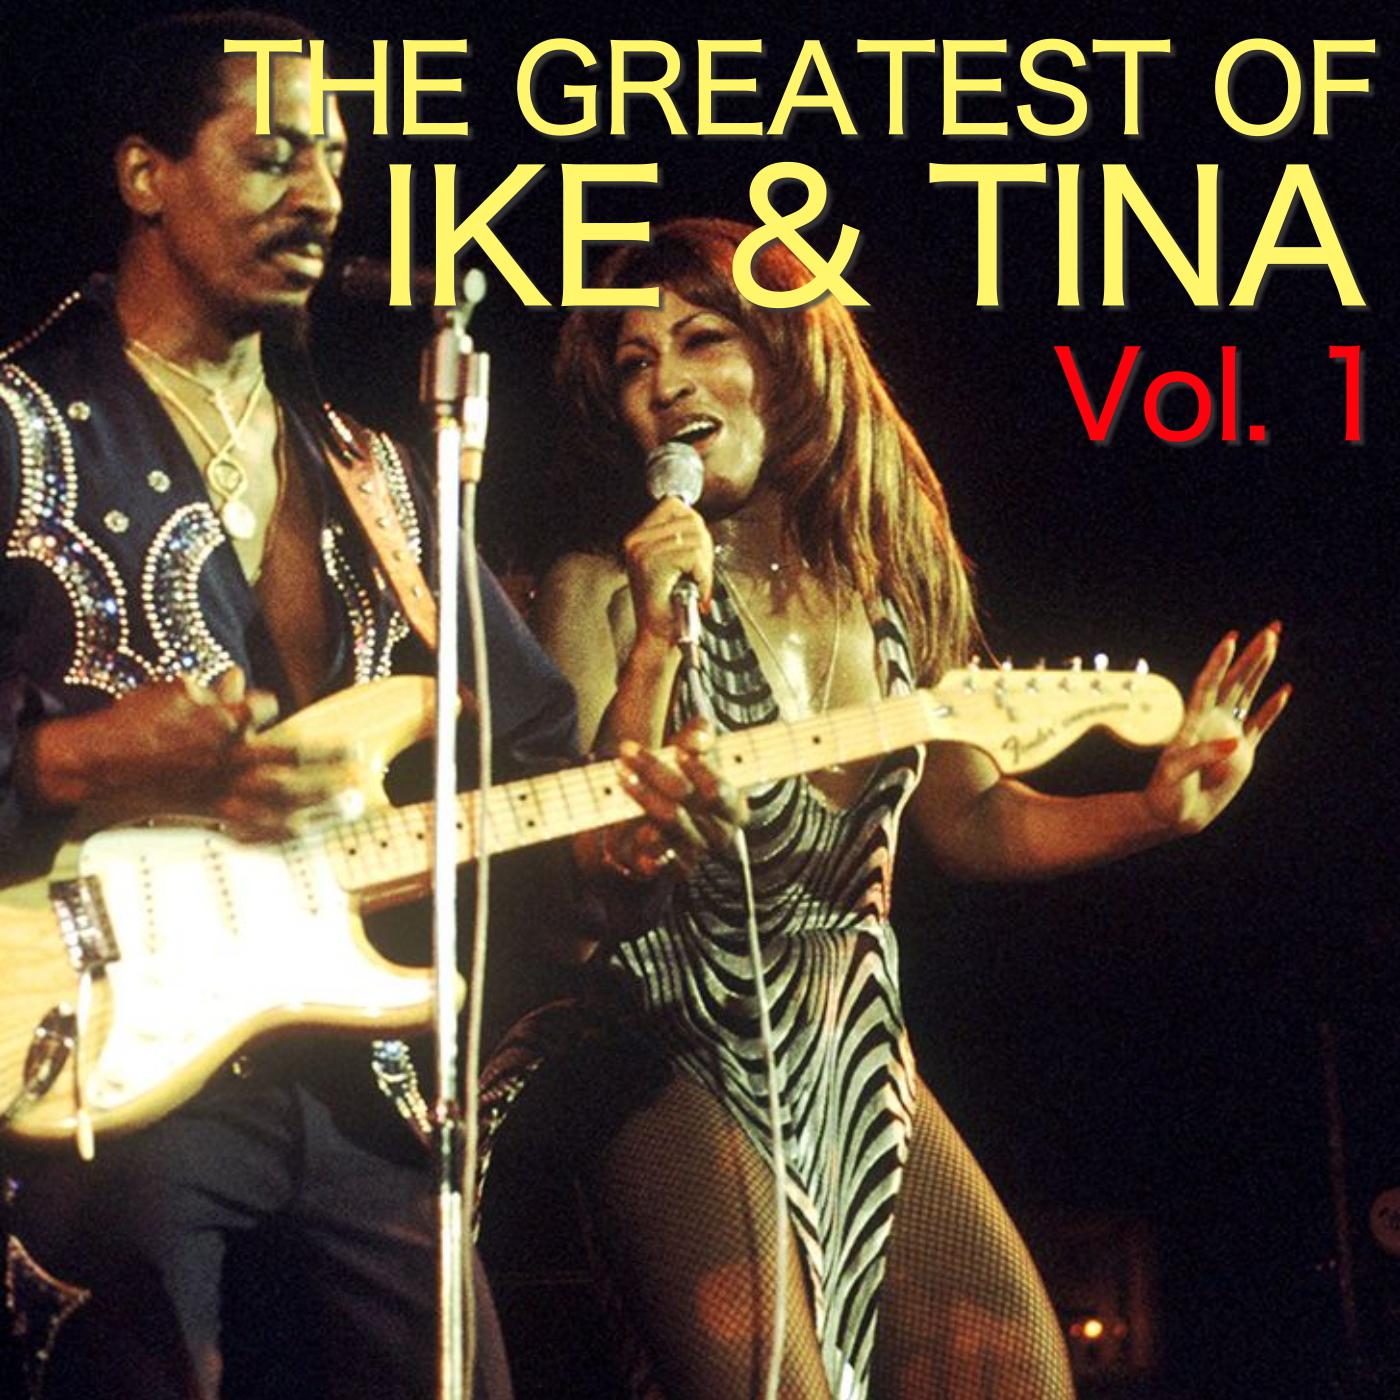 The Greatest Of Ike & Tina Vol. 1